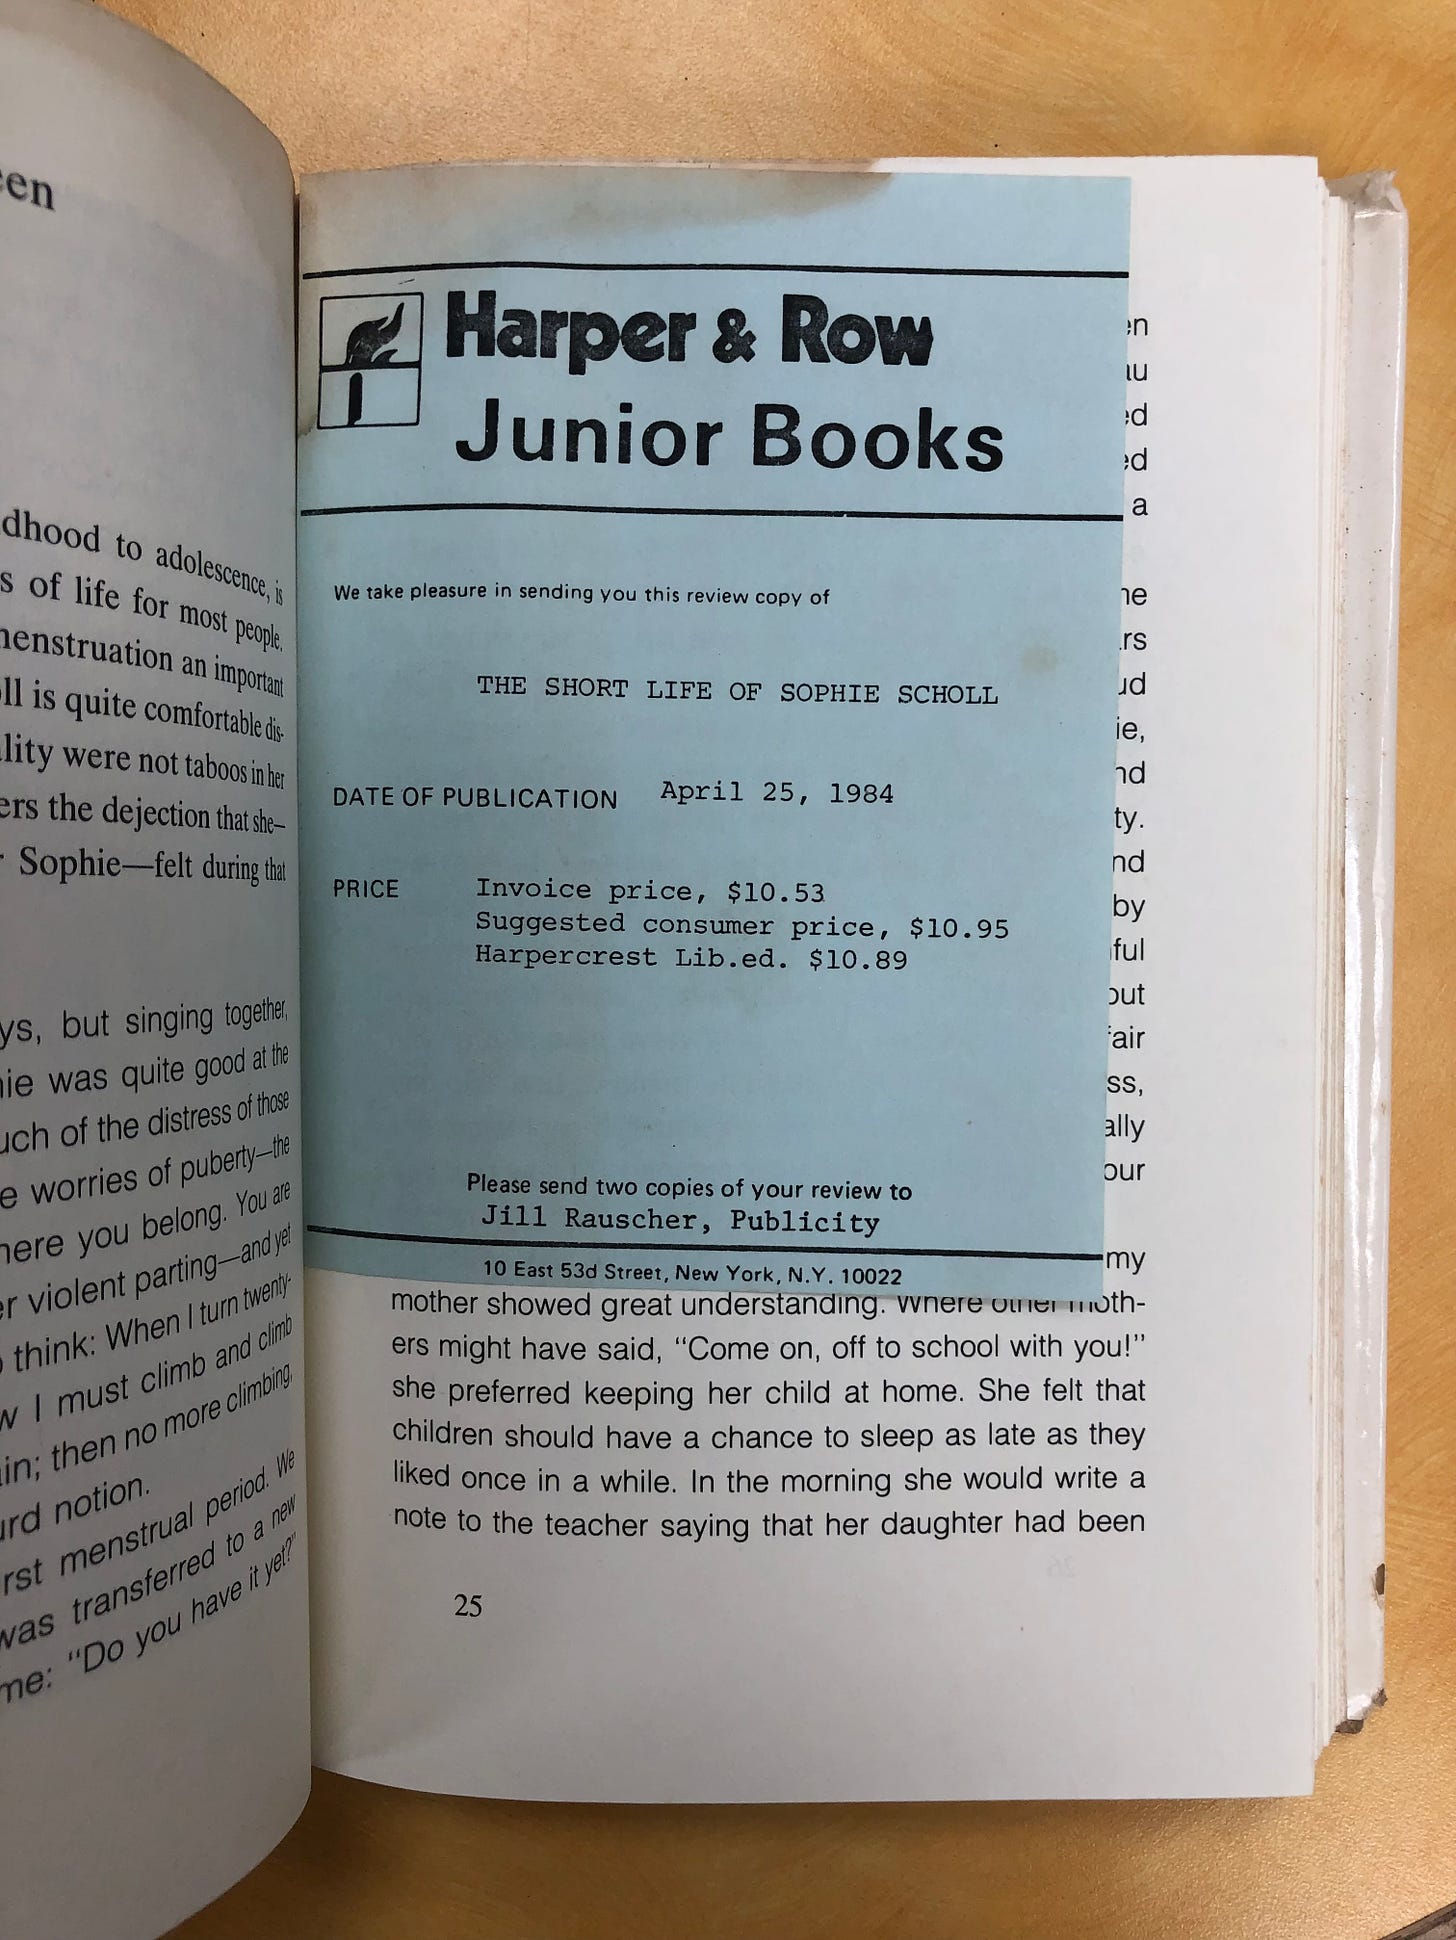 Picture of paper stuck in Hermann Vinke book, from Harper & Row back in 1984, transmitting the book as a review copy